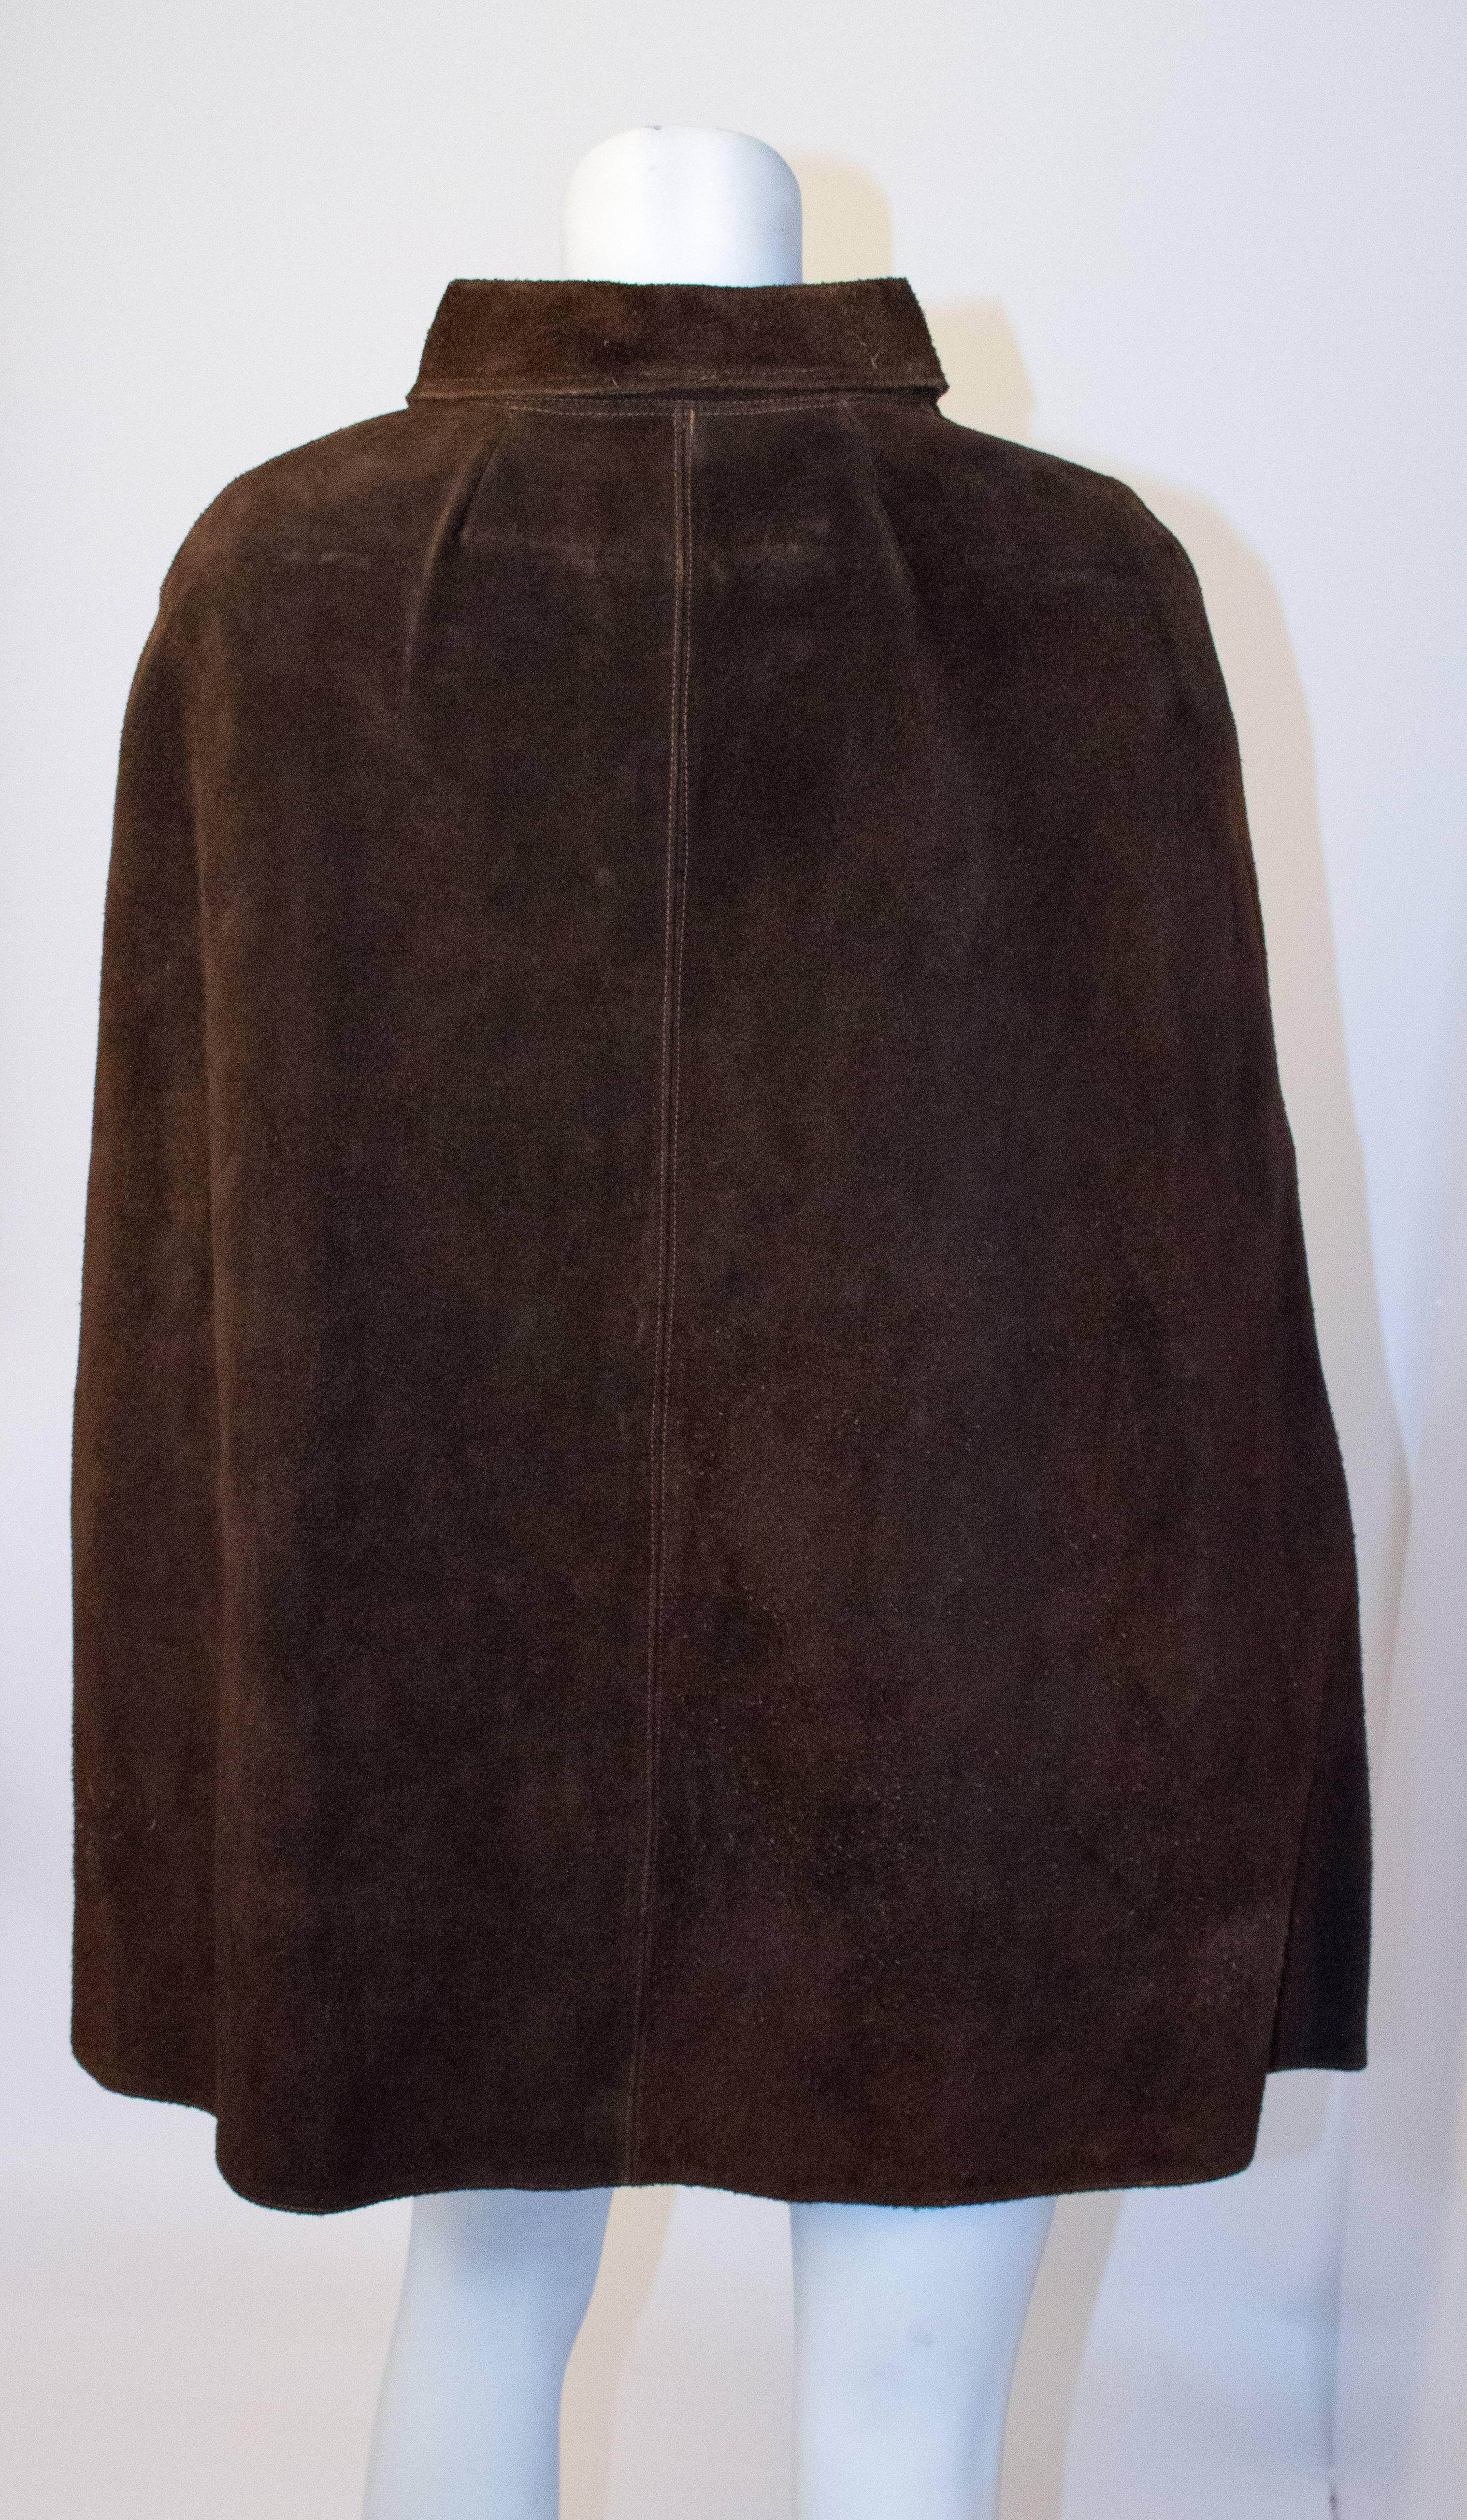 70s Chocolate Brown Suede Cape with White Piece Work. Arm holes. Two front pockets. Metal zipper up the front. Unlined. 